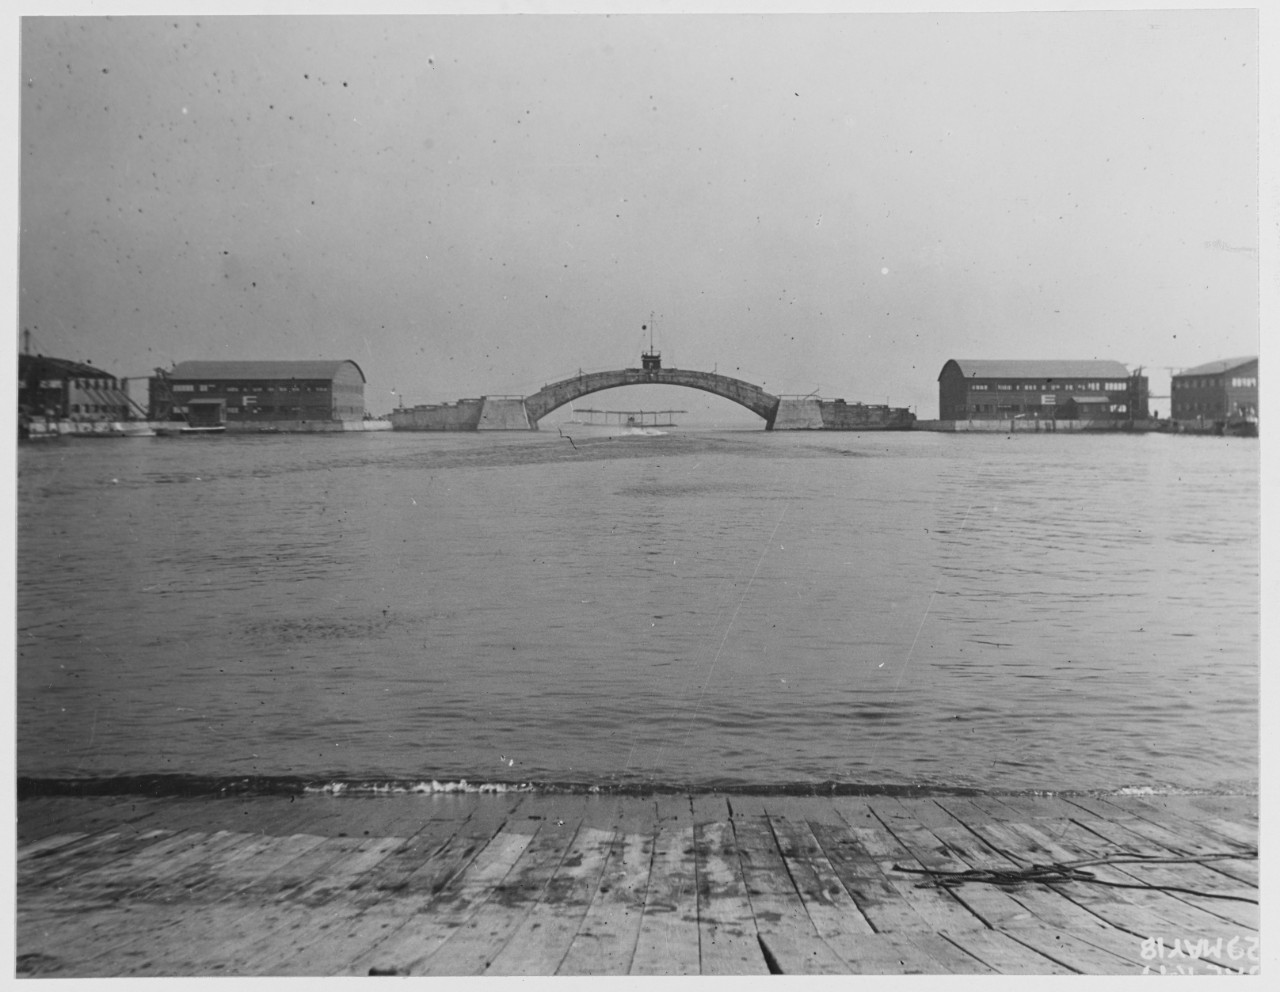 Arch and hangars on pier, Naval Air Station Hampton Roads